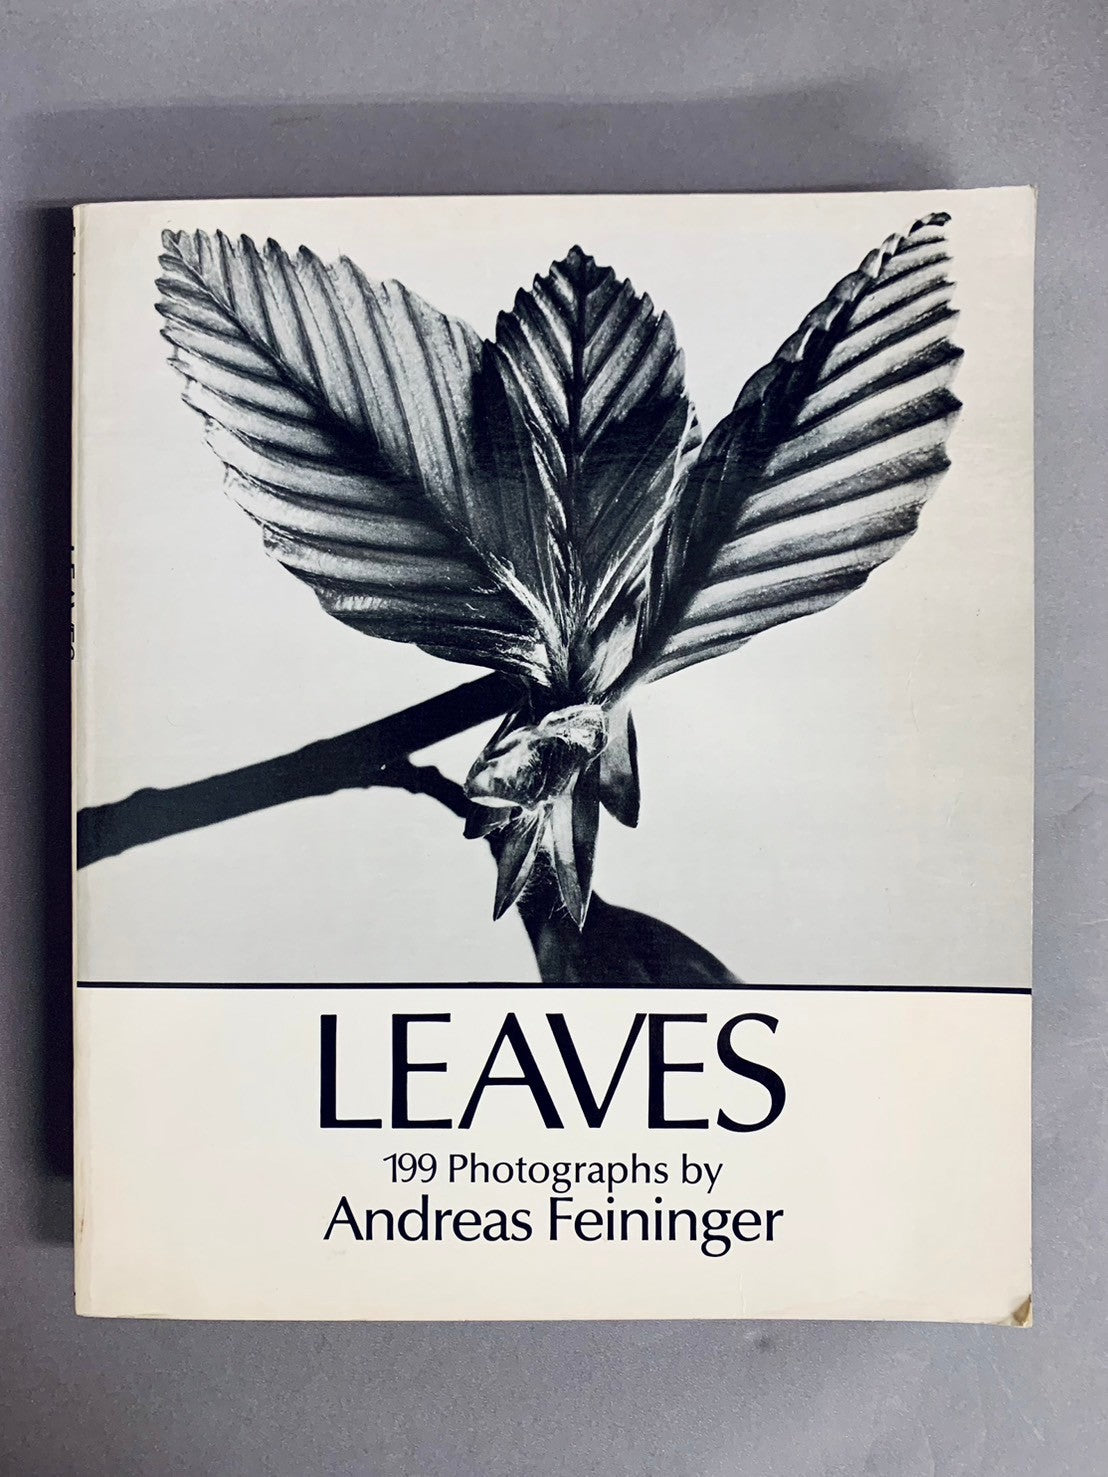 LEAVES 199 Photographs by Andreas Feininger　アンドレアス・ファイニンガー　洋書